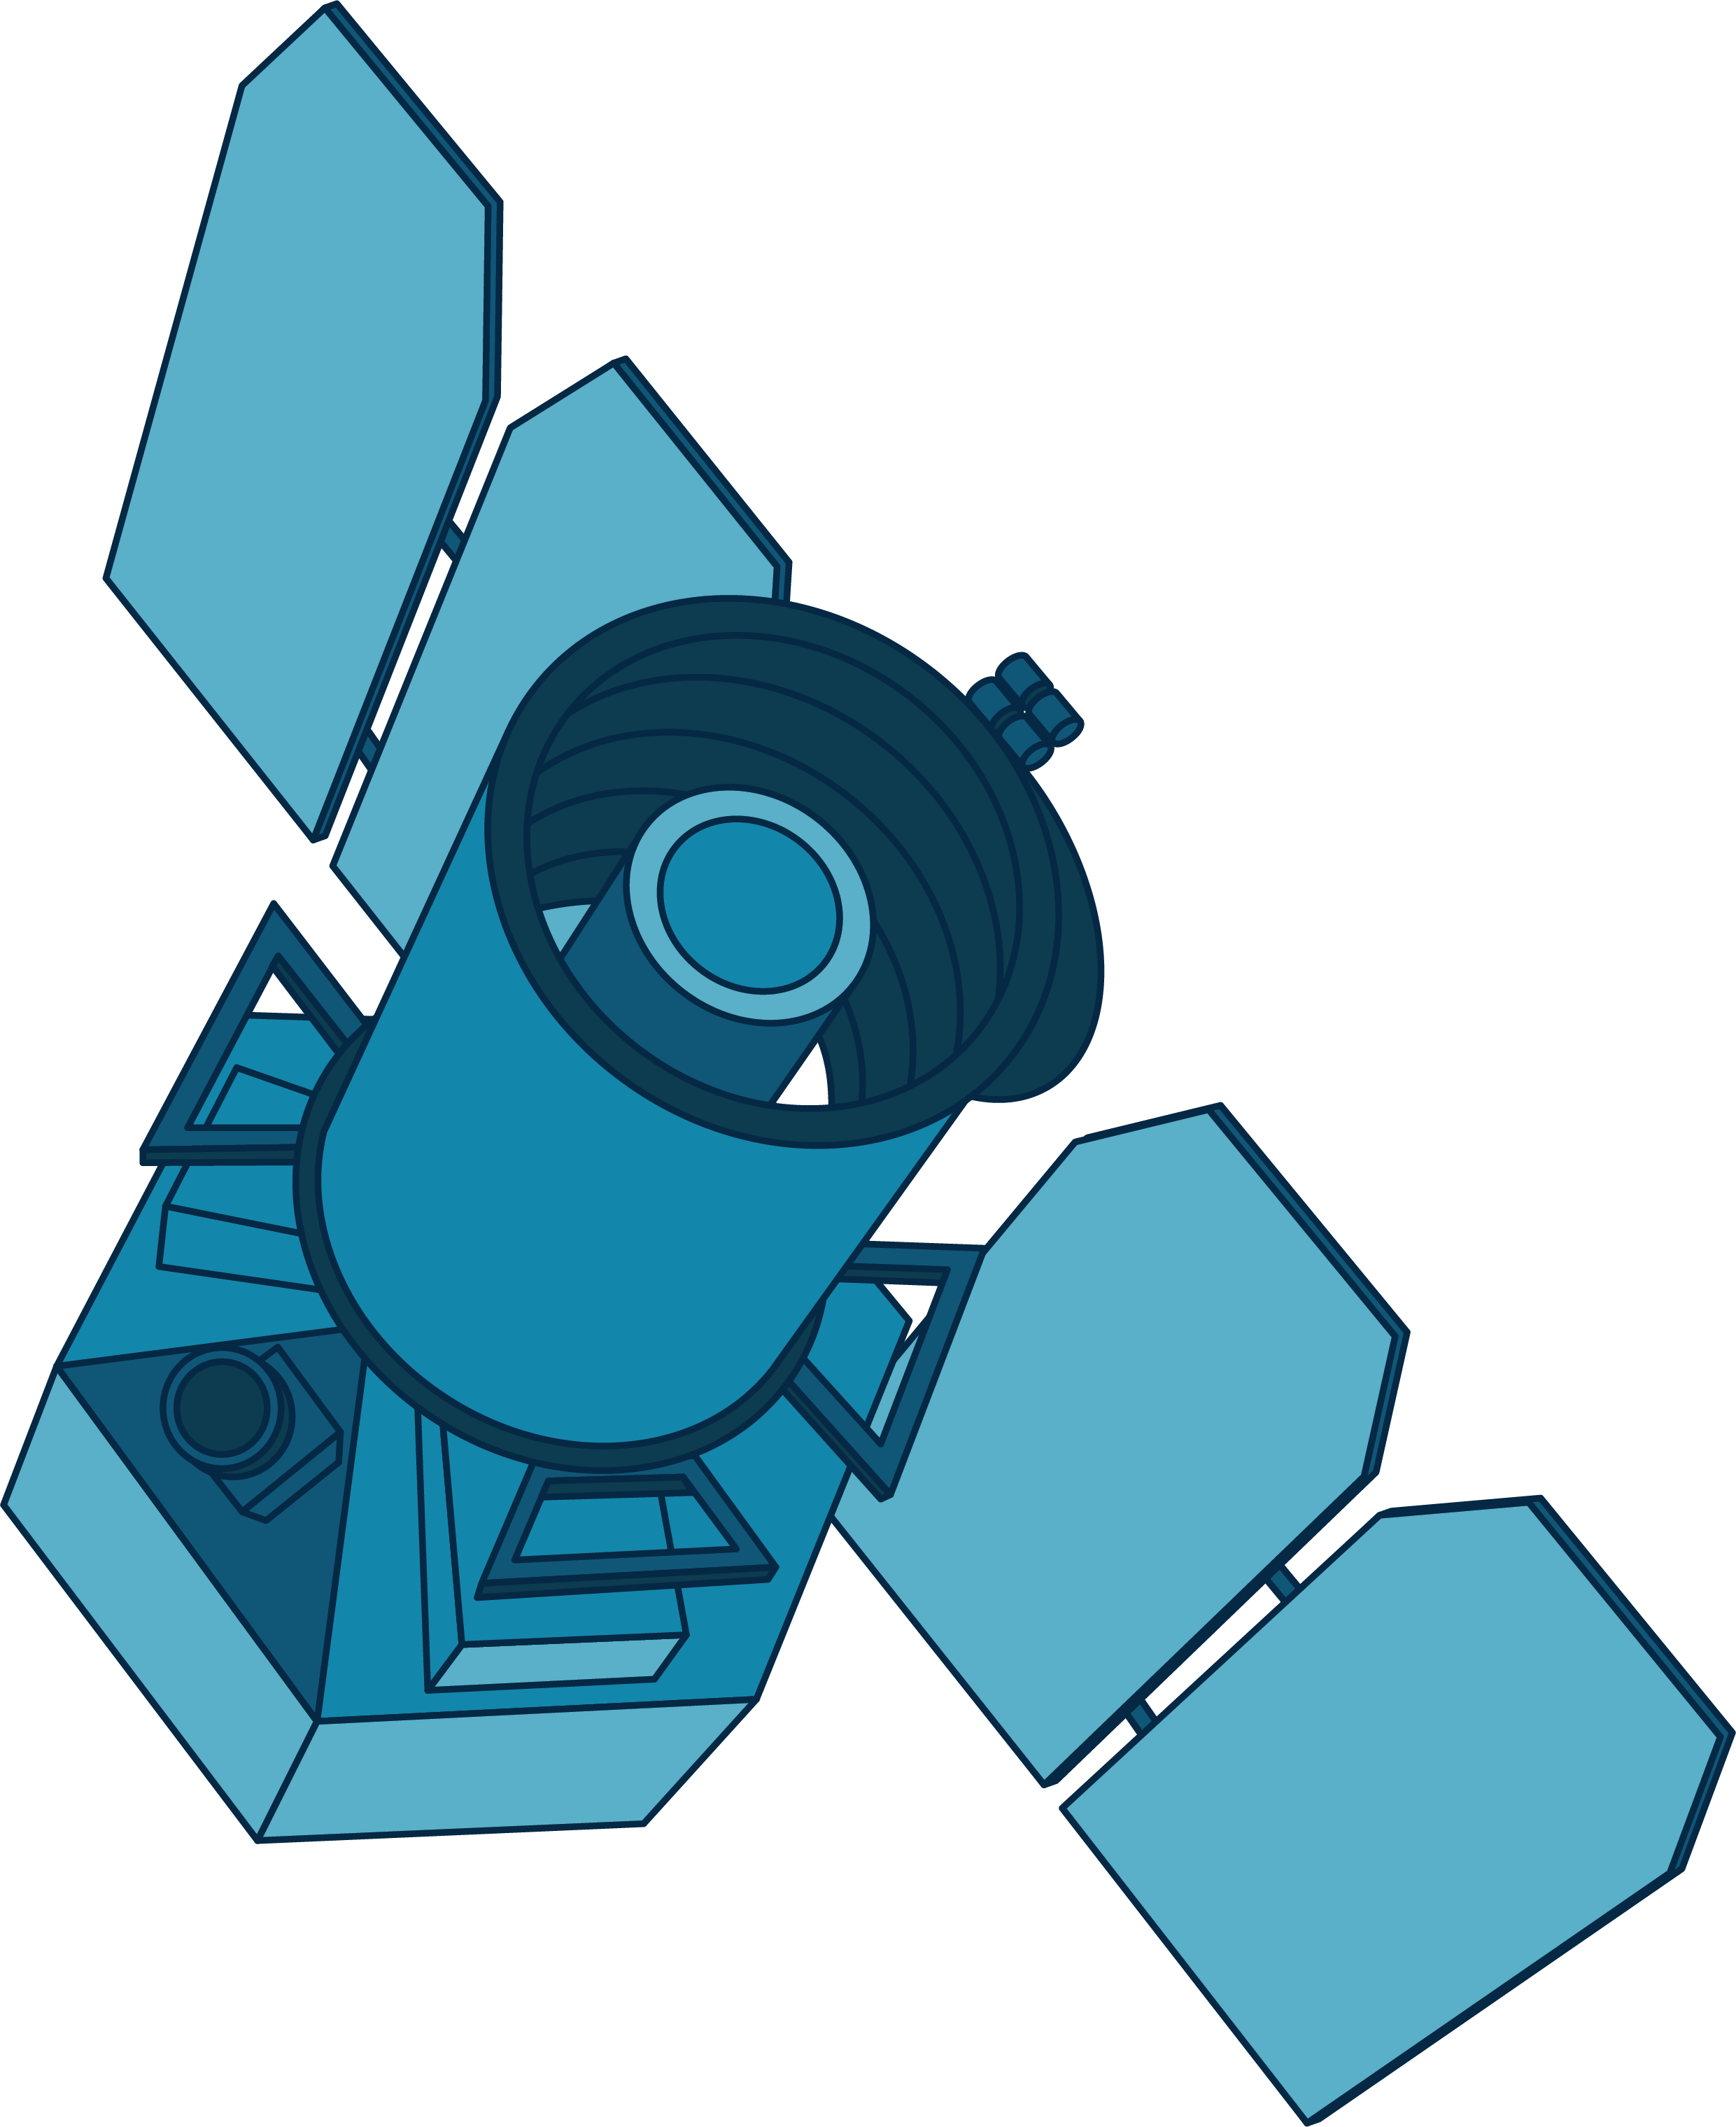 GALEX is illustrated in multiple shades of blue. The spacecraft body is made up of a hexagonal object topped by a cylindrical object. Solar panels extend to either side.